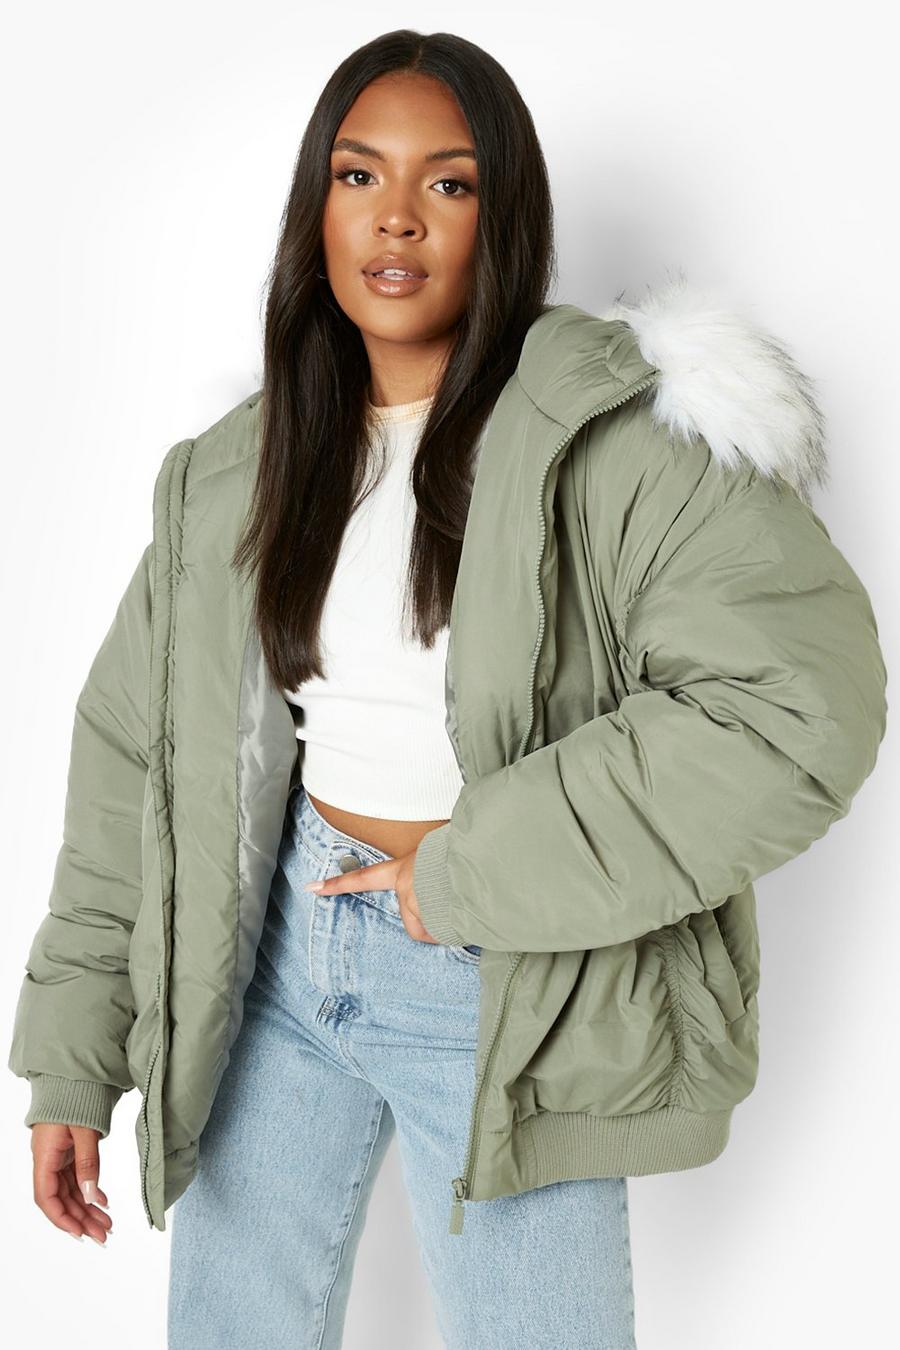 Winter Jacket Women's Warm Lined Large Sizes – Winter Coat Women's Elegant  Fitted Women's Jacket Winter Jackets with Fur Hood Long Transition Jackets